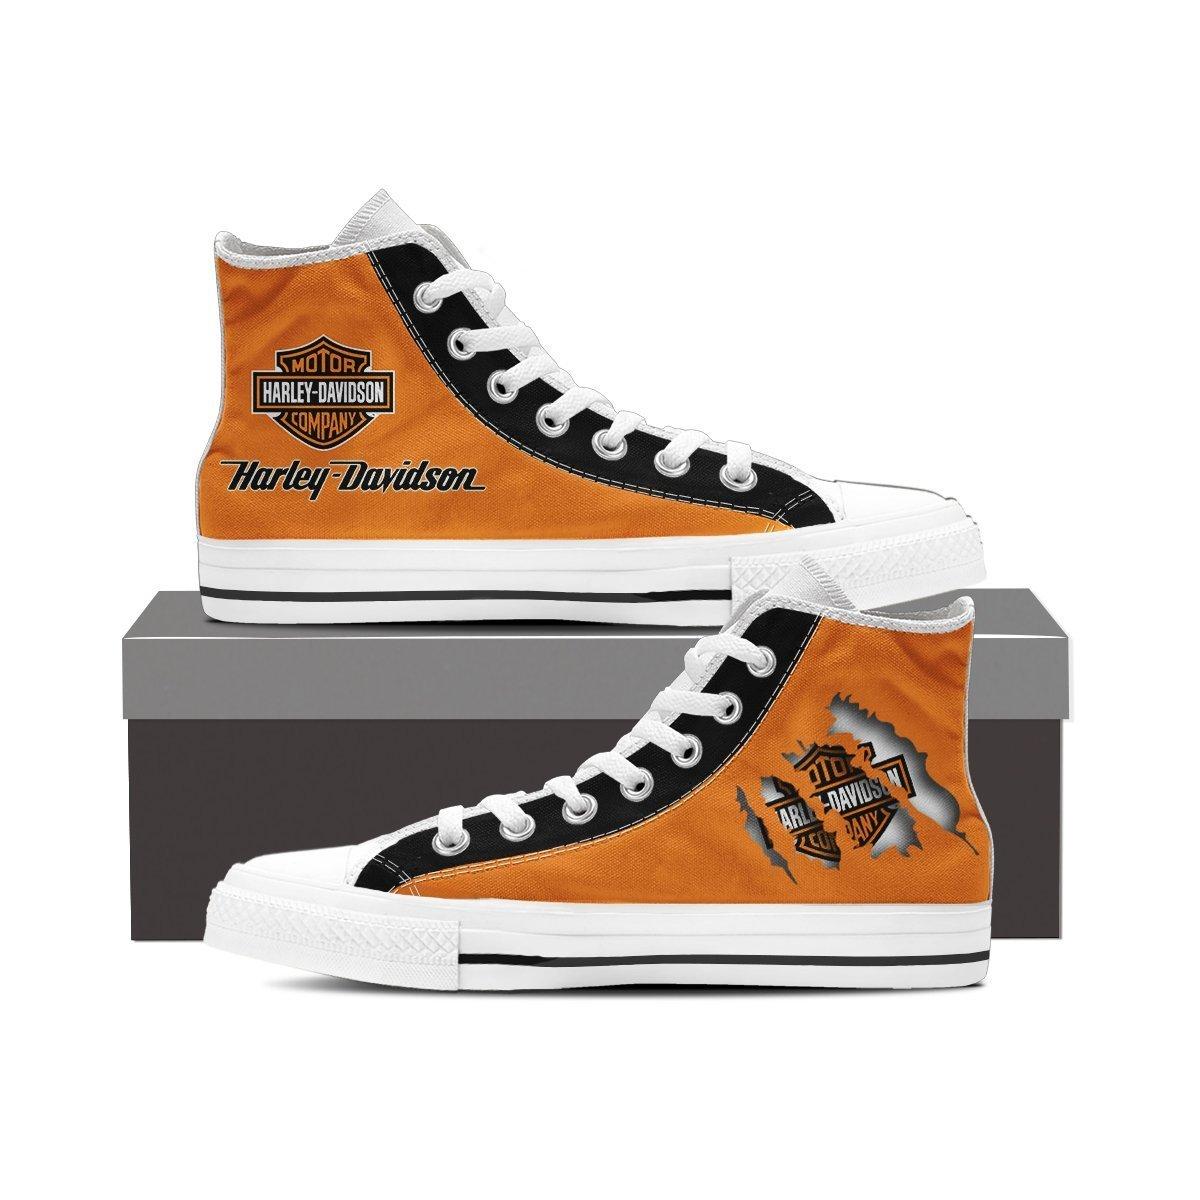 Harley Davidson Motorcycles Limited Edition Black Or White Sole And ...